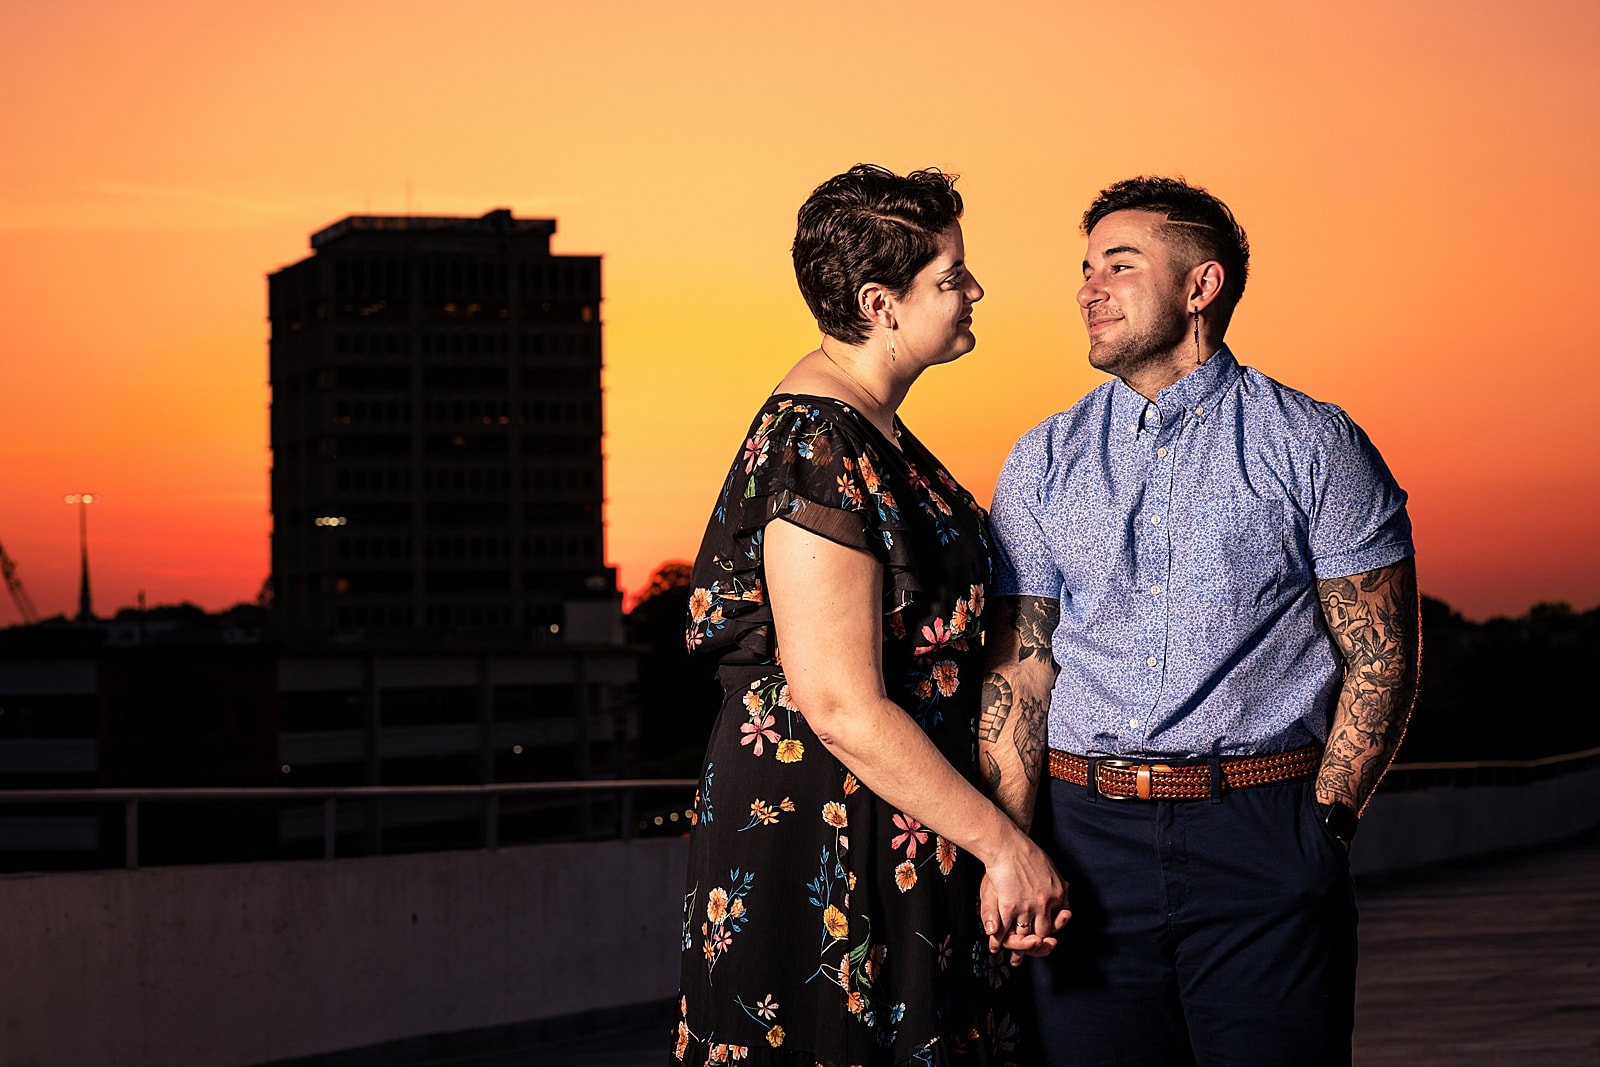 Sunset engagement photos in downtown Durham